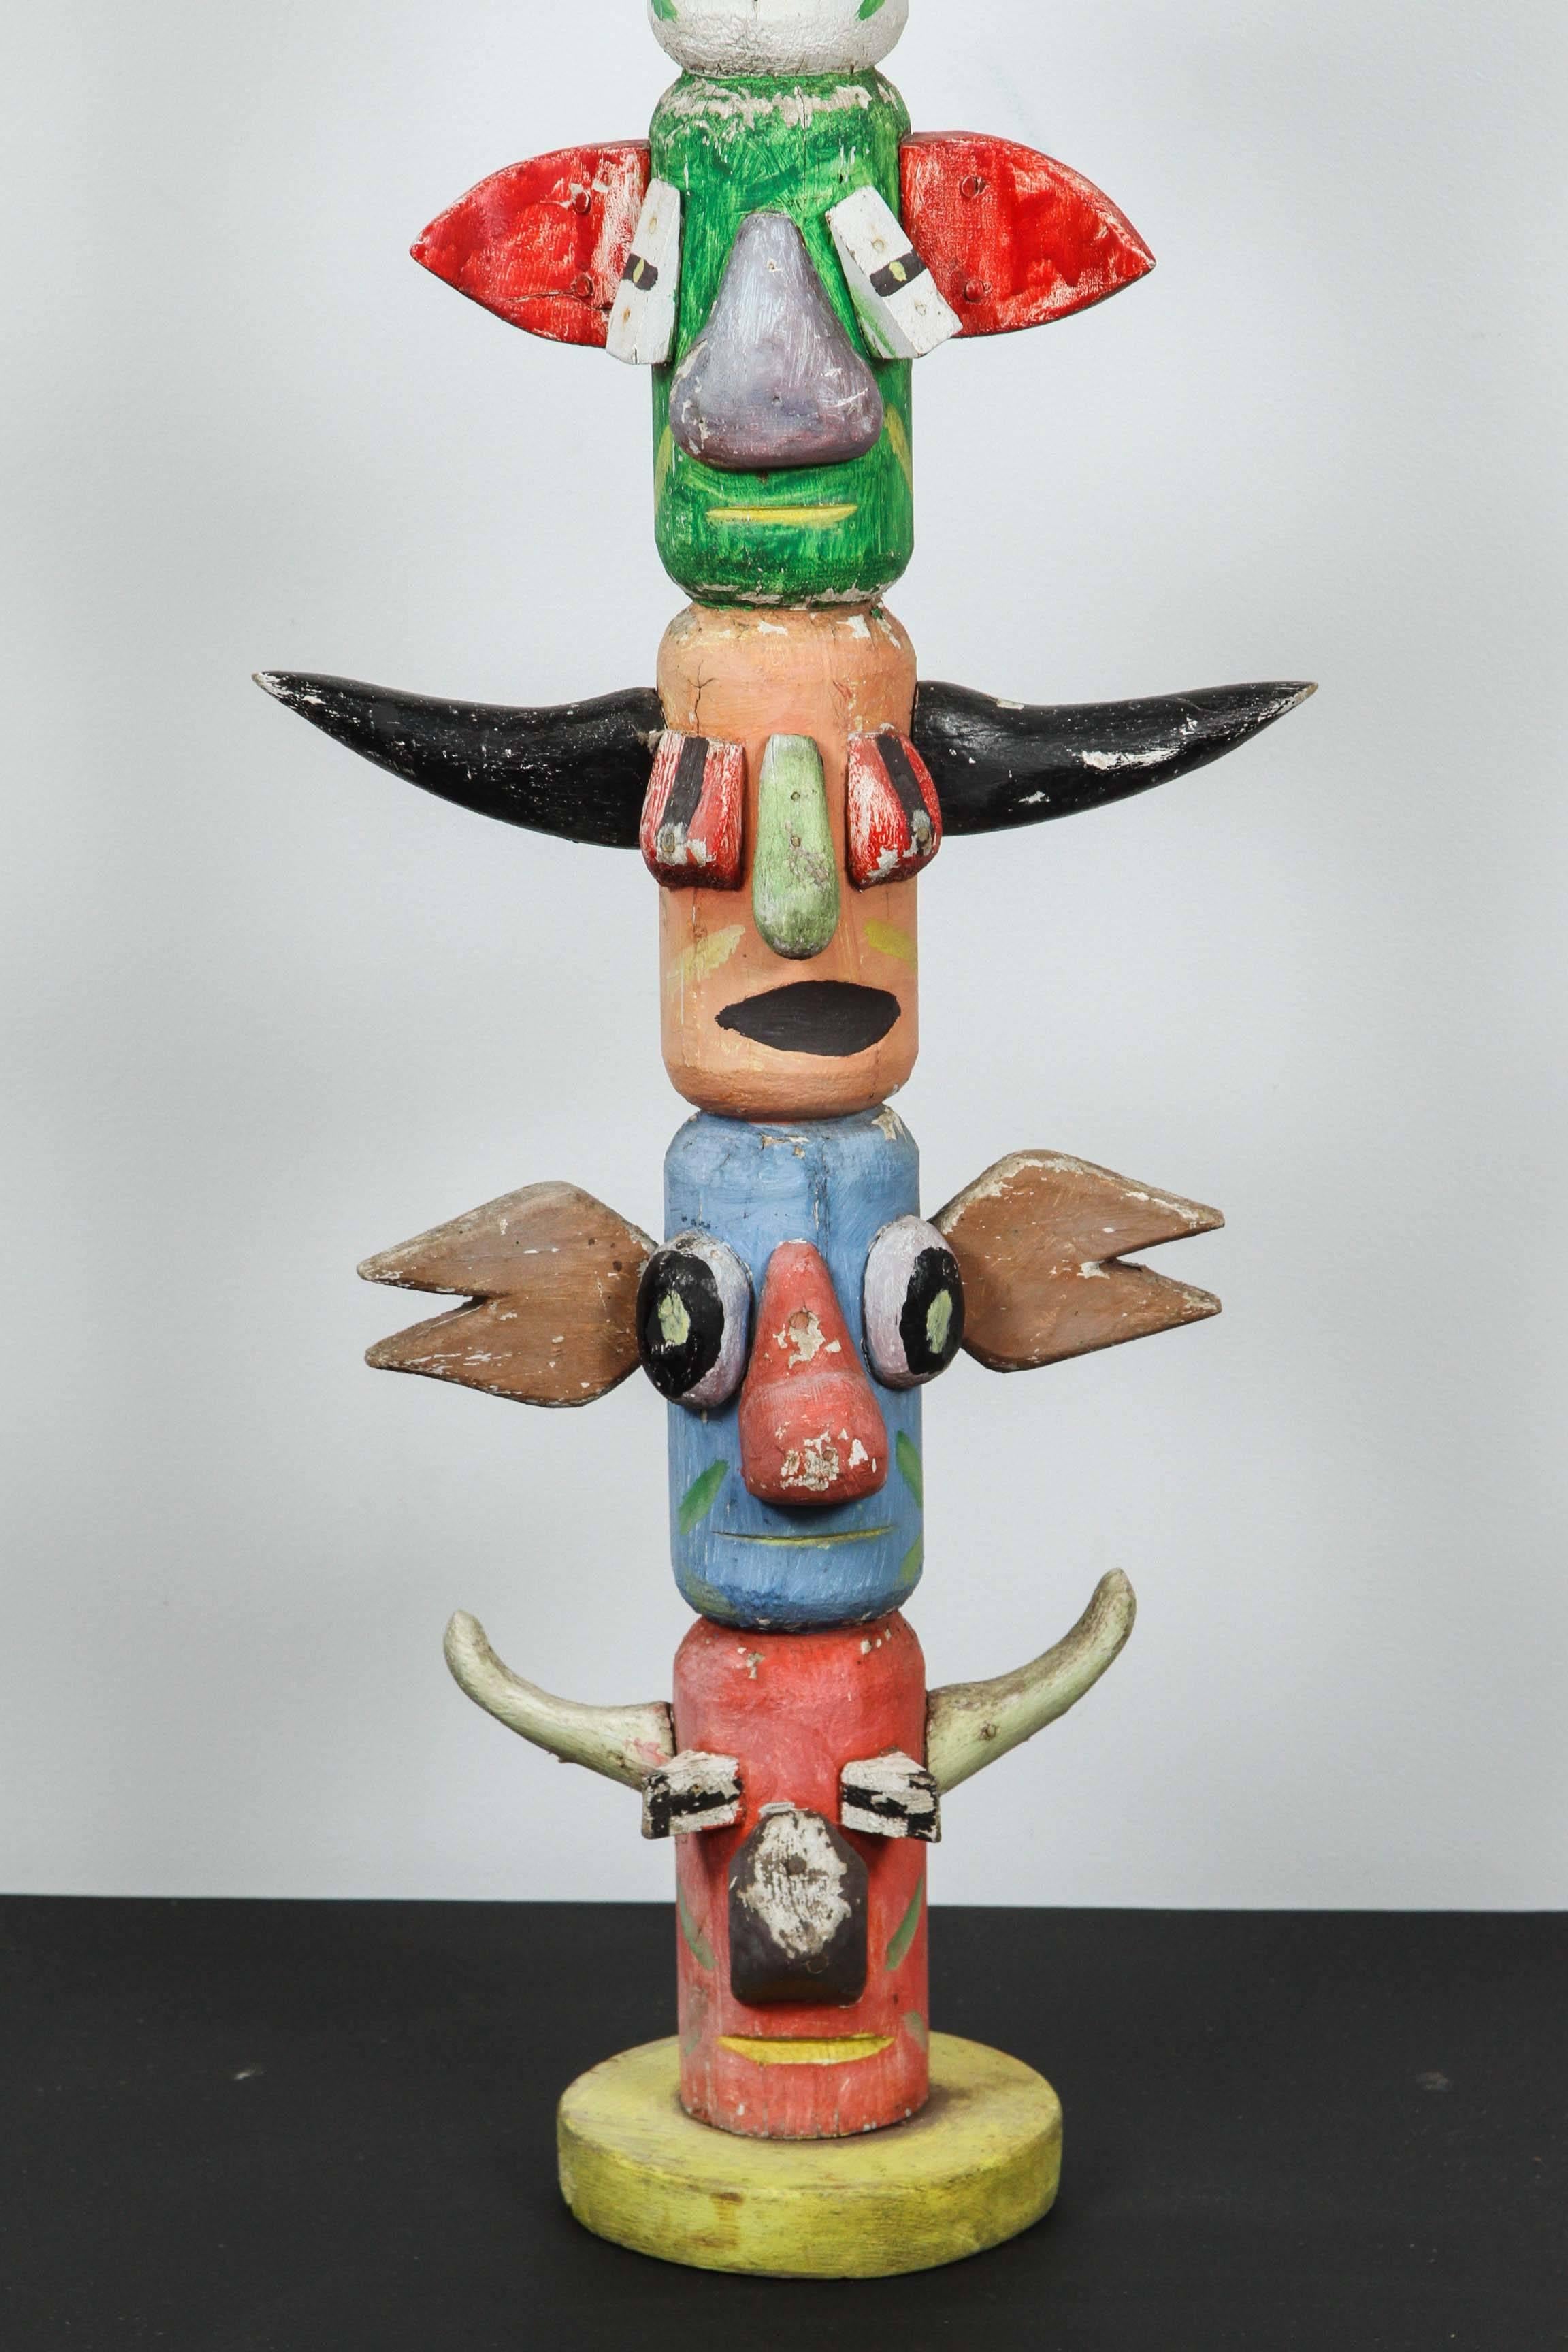 Midwestern United States hand-carved American Folk Art TOTEM pole found in Wisconsin, circa 1930s. Eight whimsical carved spirit animals with bright original paint surface.